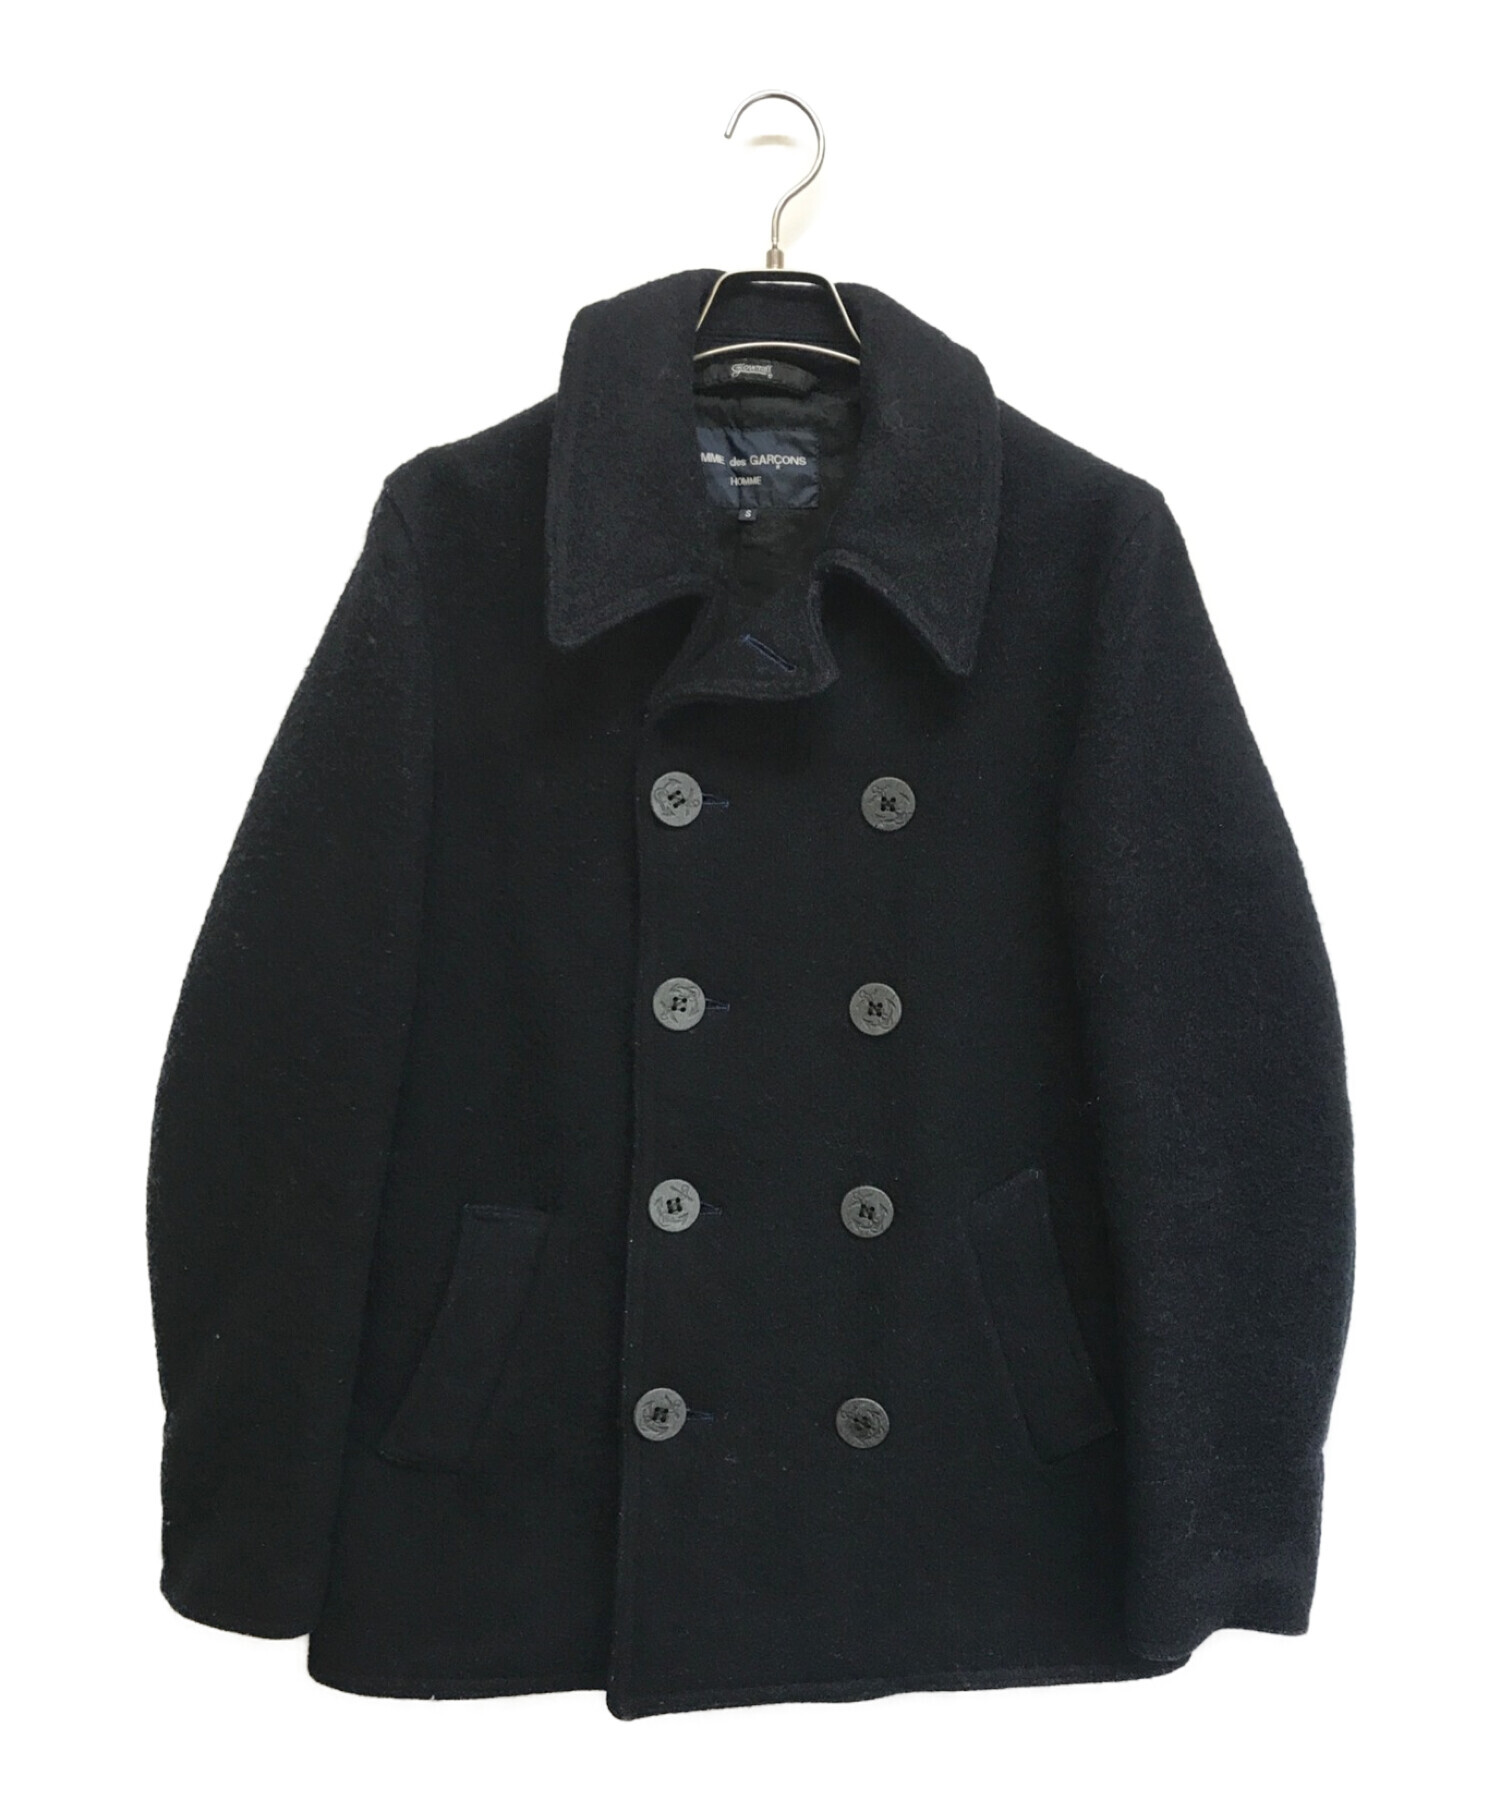 Gloverall×COMME des GARCONS HOMME (グローバーオール×コムデギャルソン) 13AW縮絨Pコート ネイビー サイズ:S